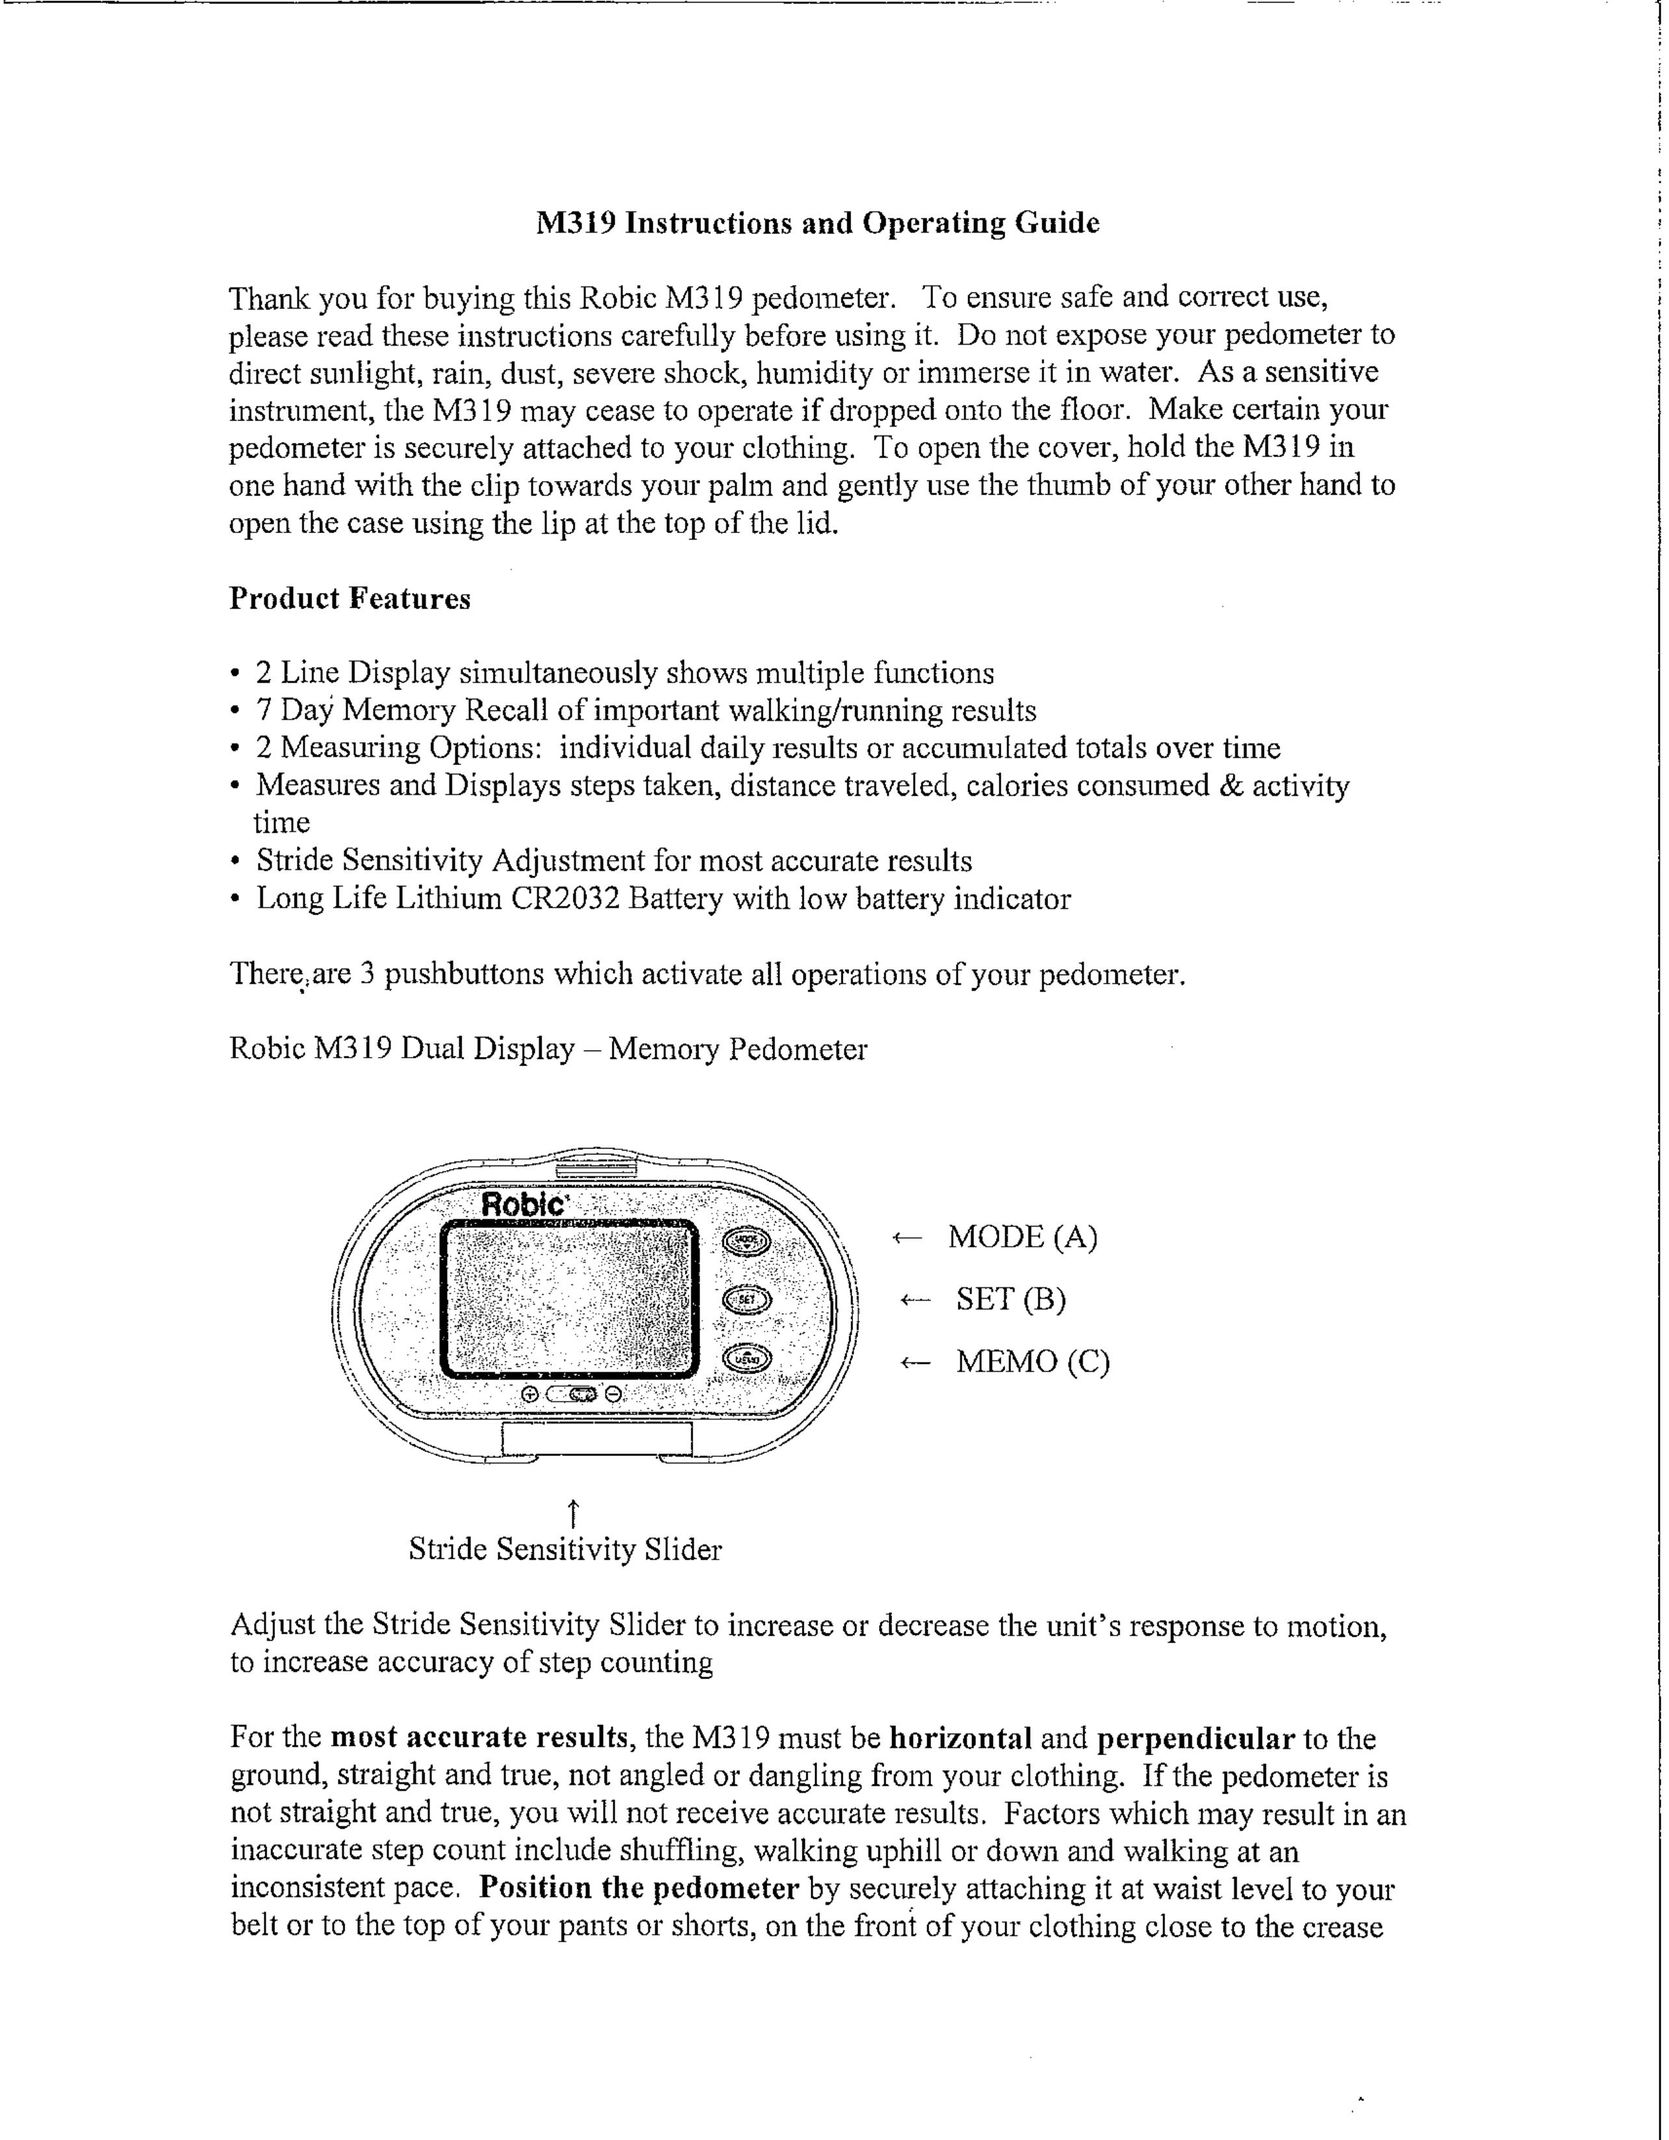 Robic M319 Fitness Electronics User Manual